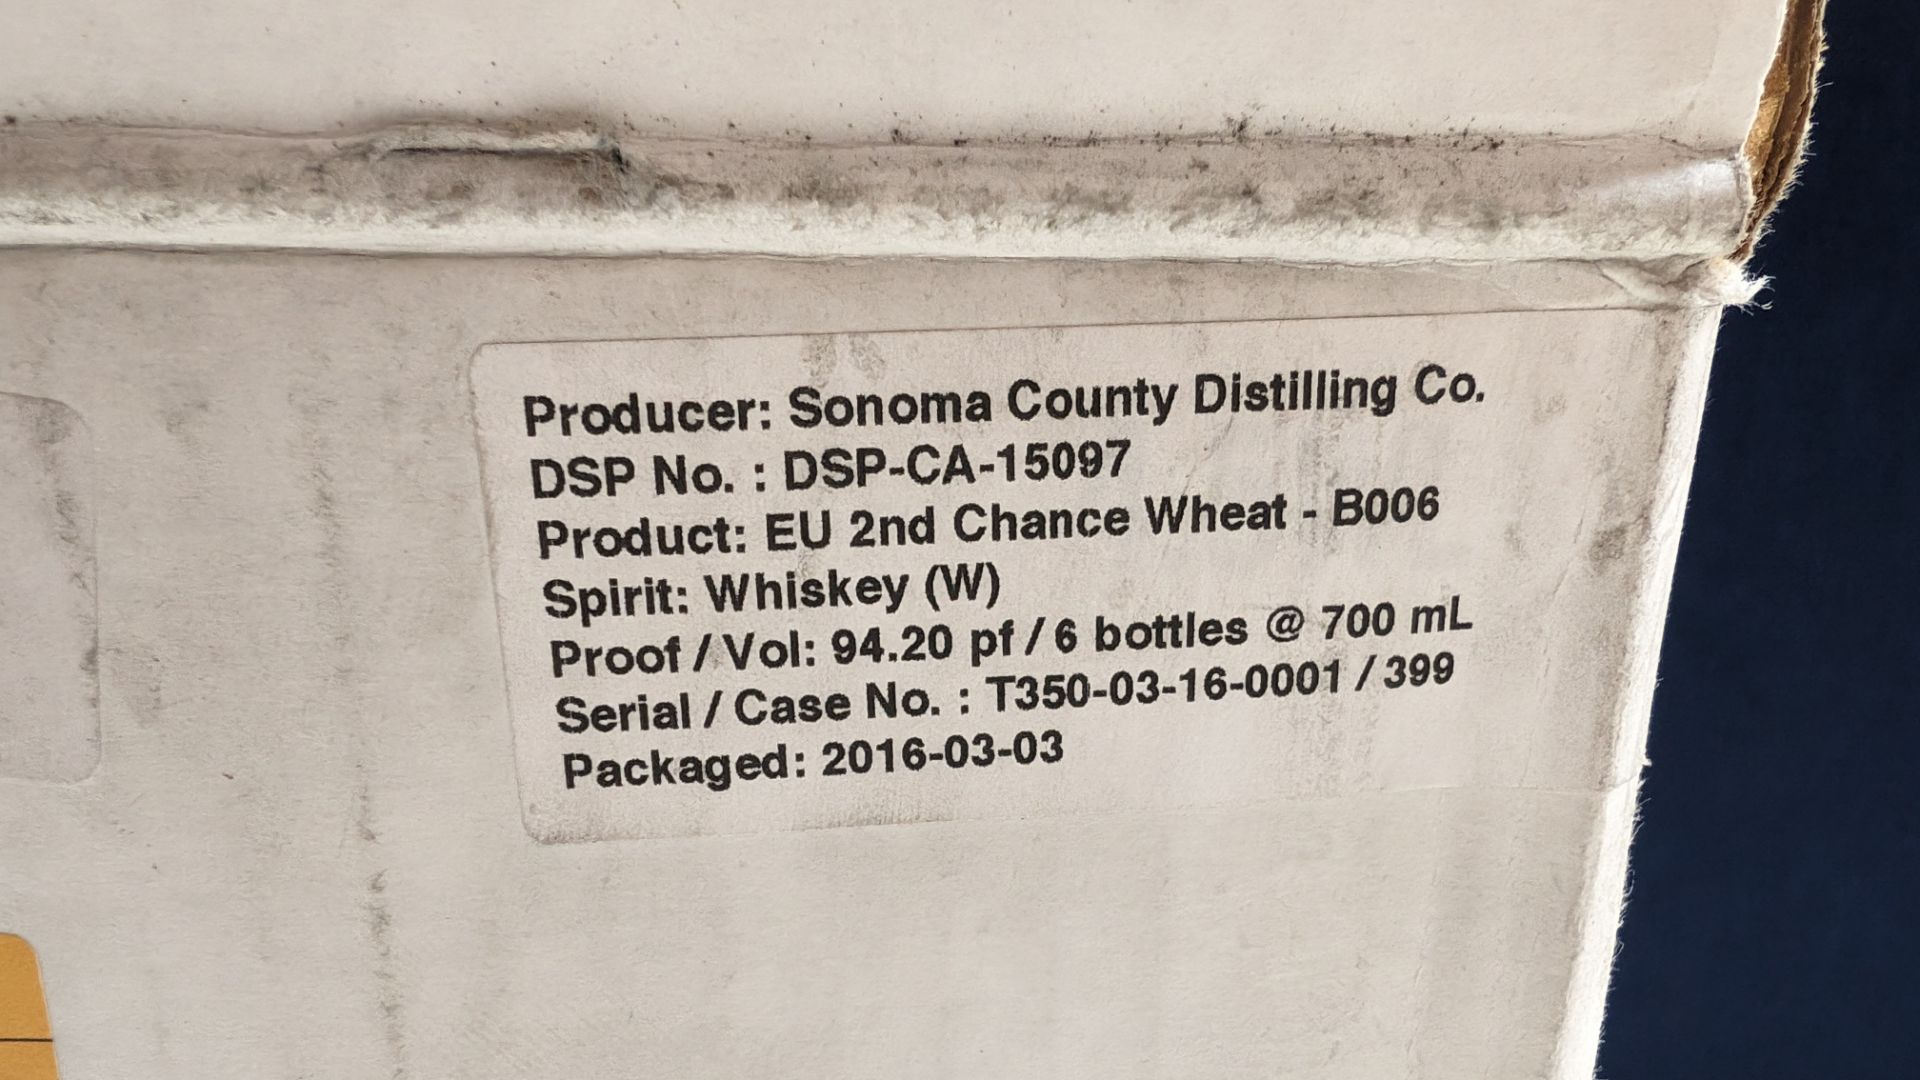 6 off 700ml bottles of Sonoma County 2nd Chance Wheat Double Alembic Pot Distilled Whiskey. In whit - Bild 7 aus 8